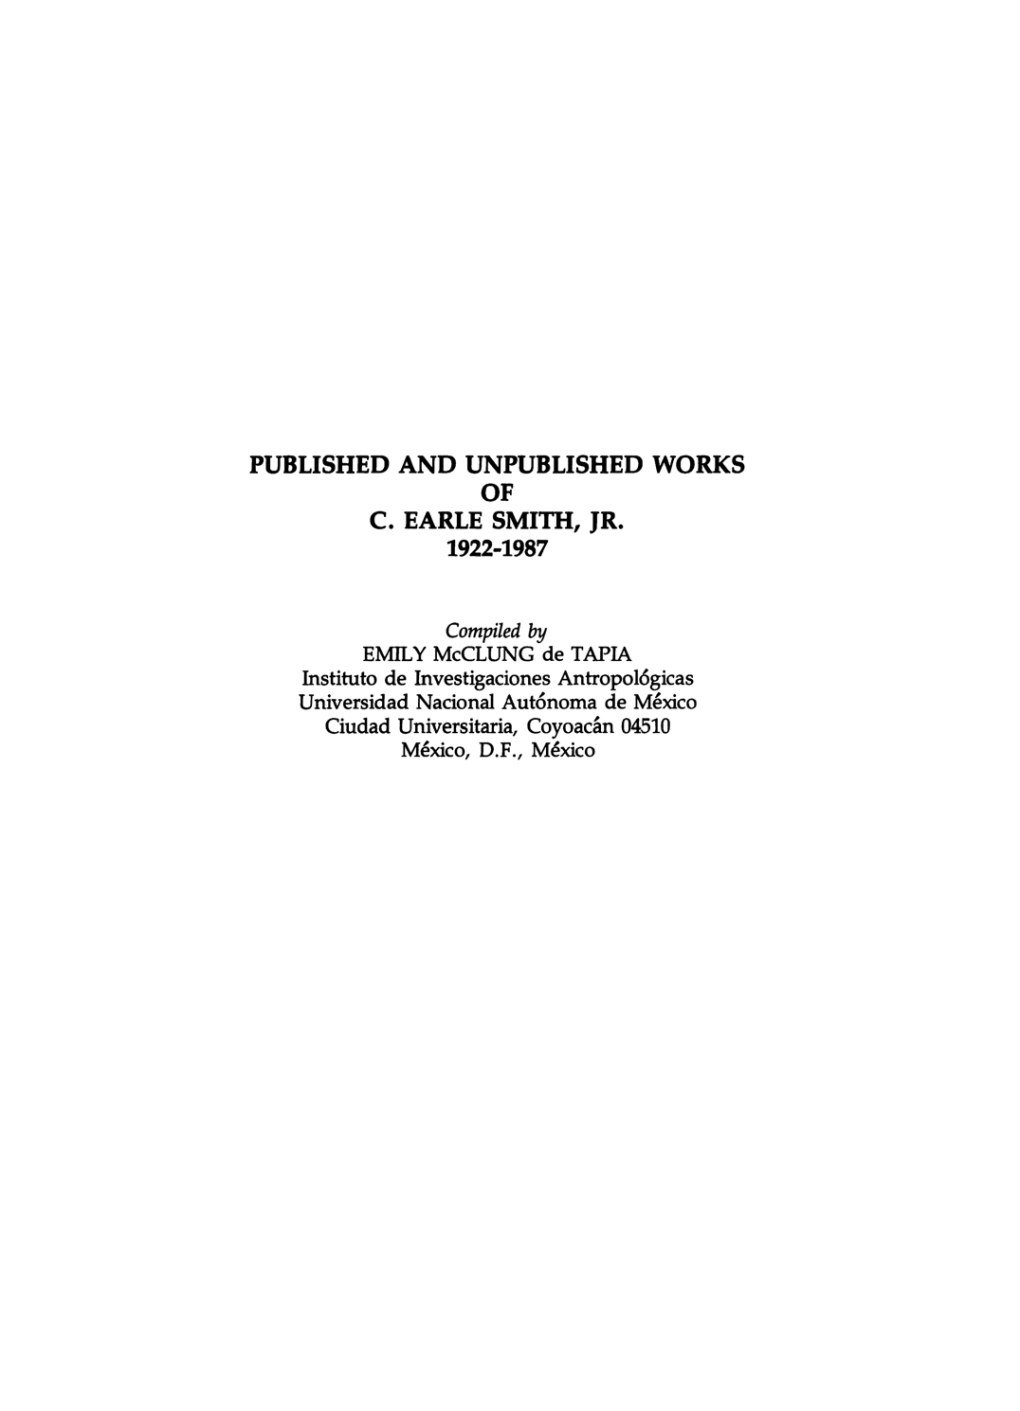 Published and Unpublished Works C. Earle Smith, Jr